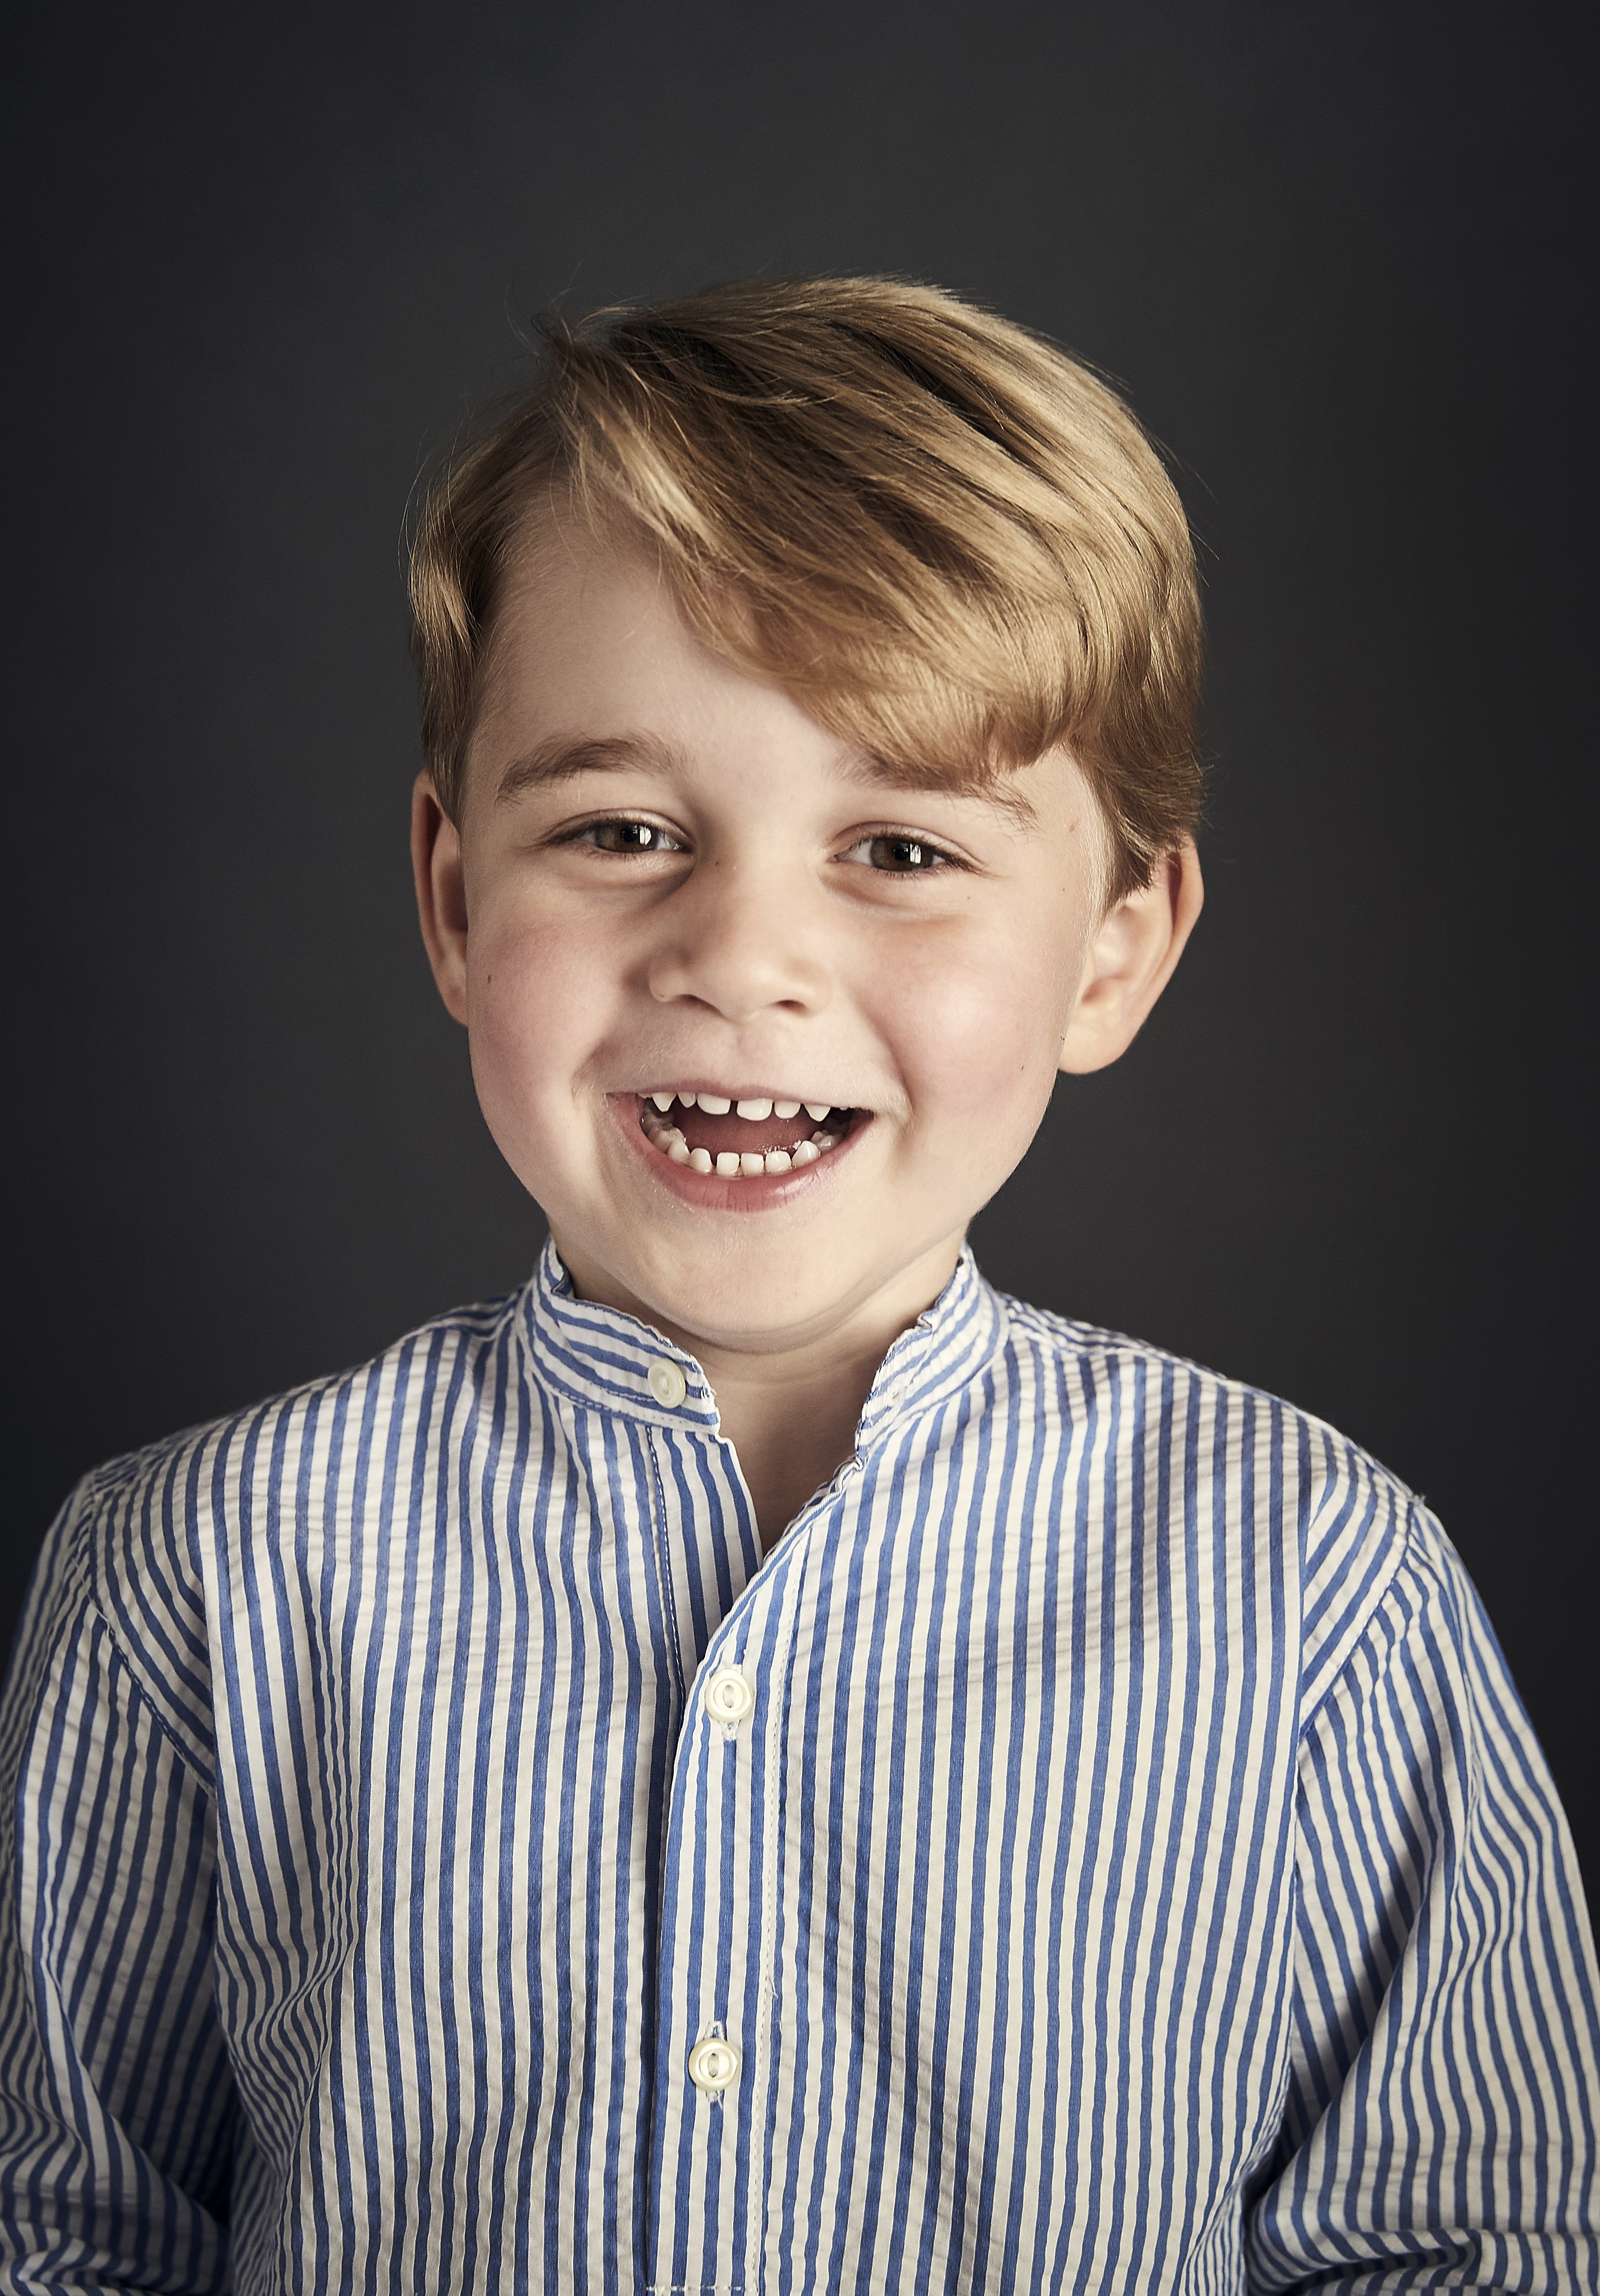 Prince George's portrait released ahead of his fourth birthday. | Source: Getty Images